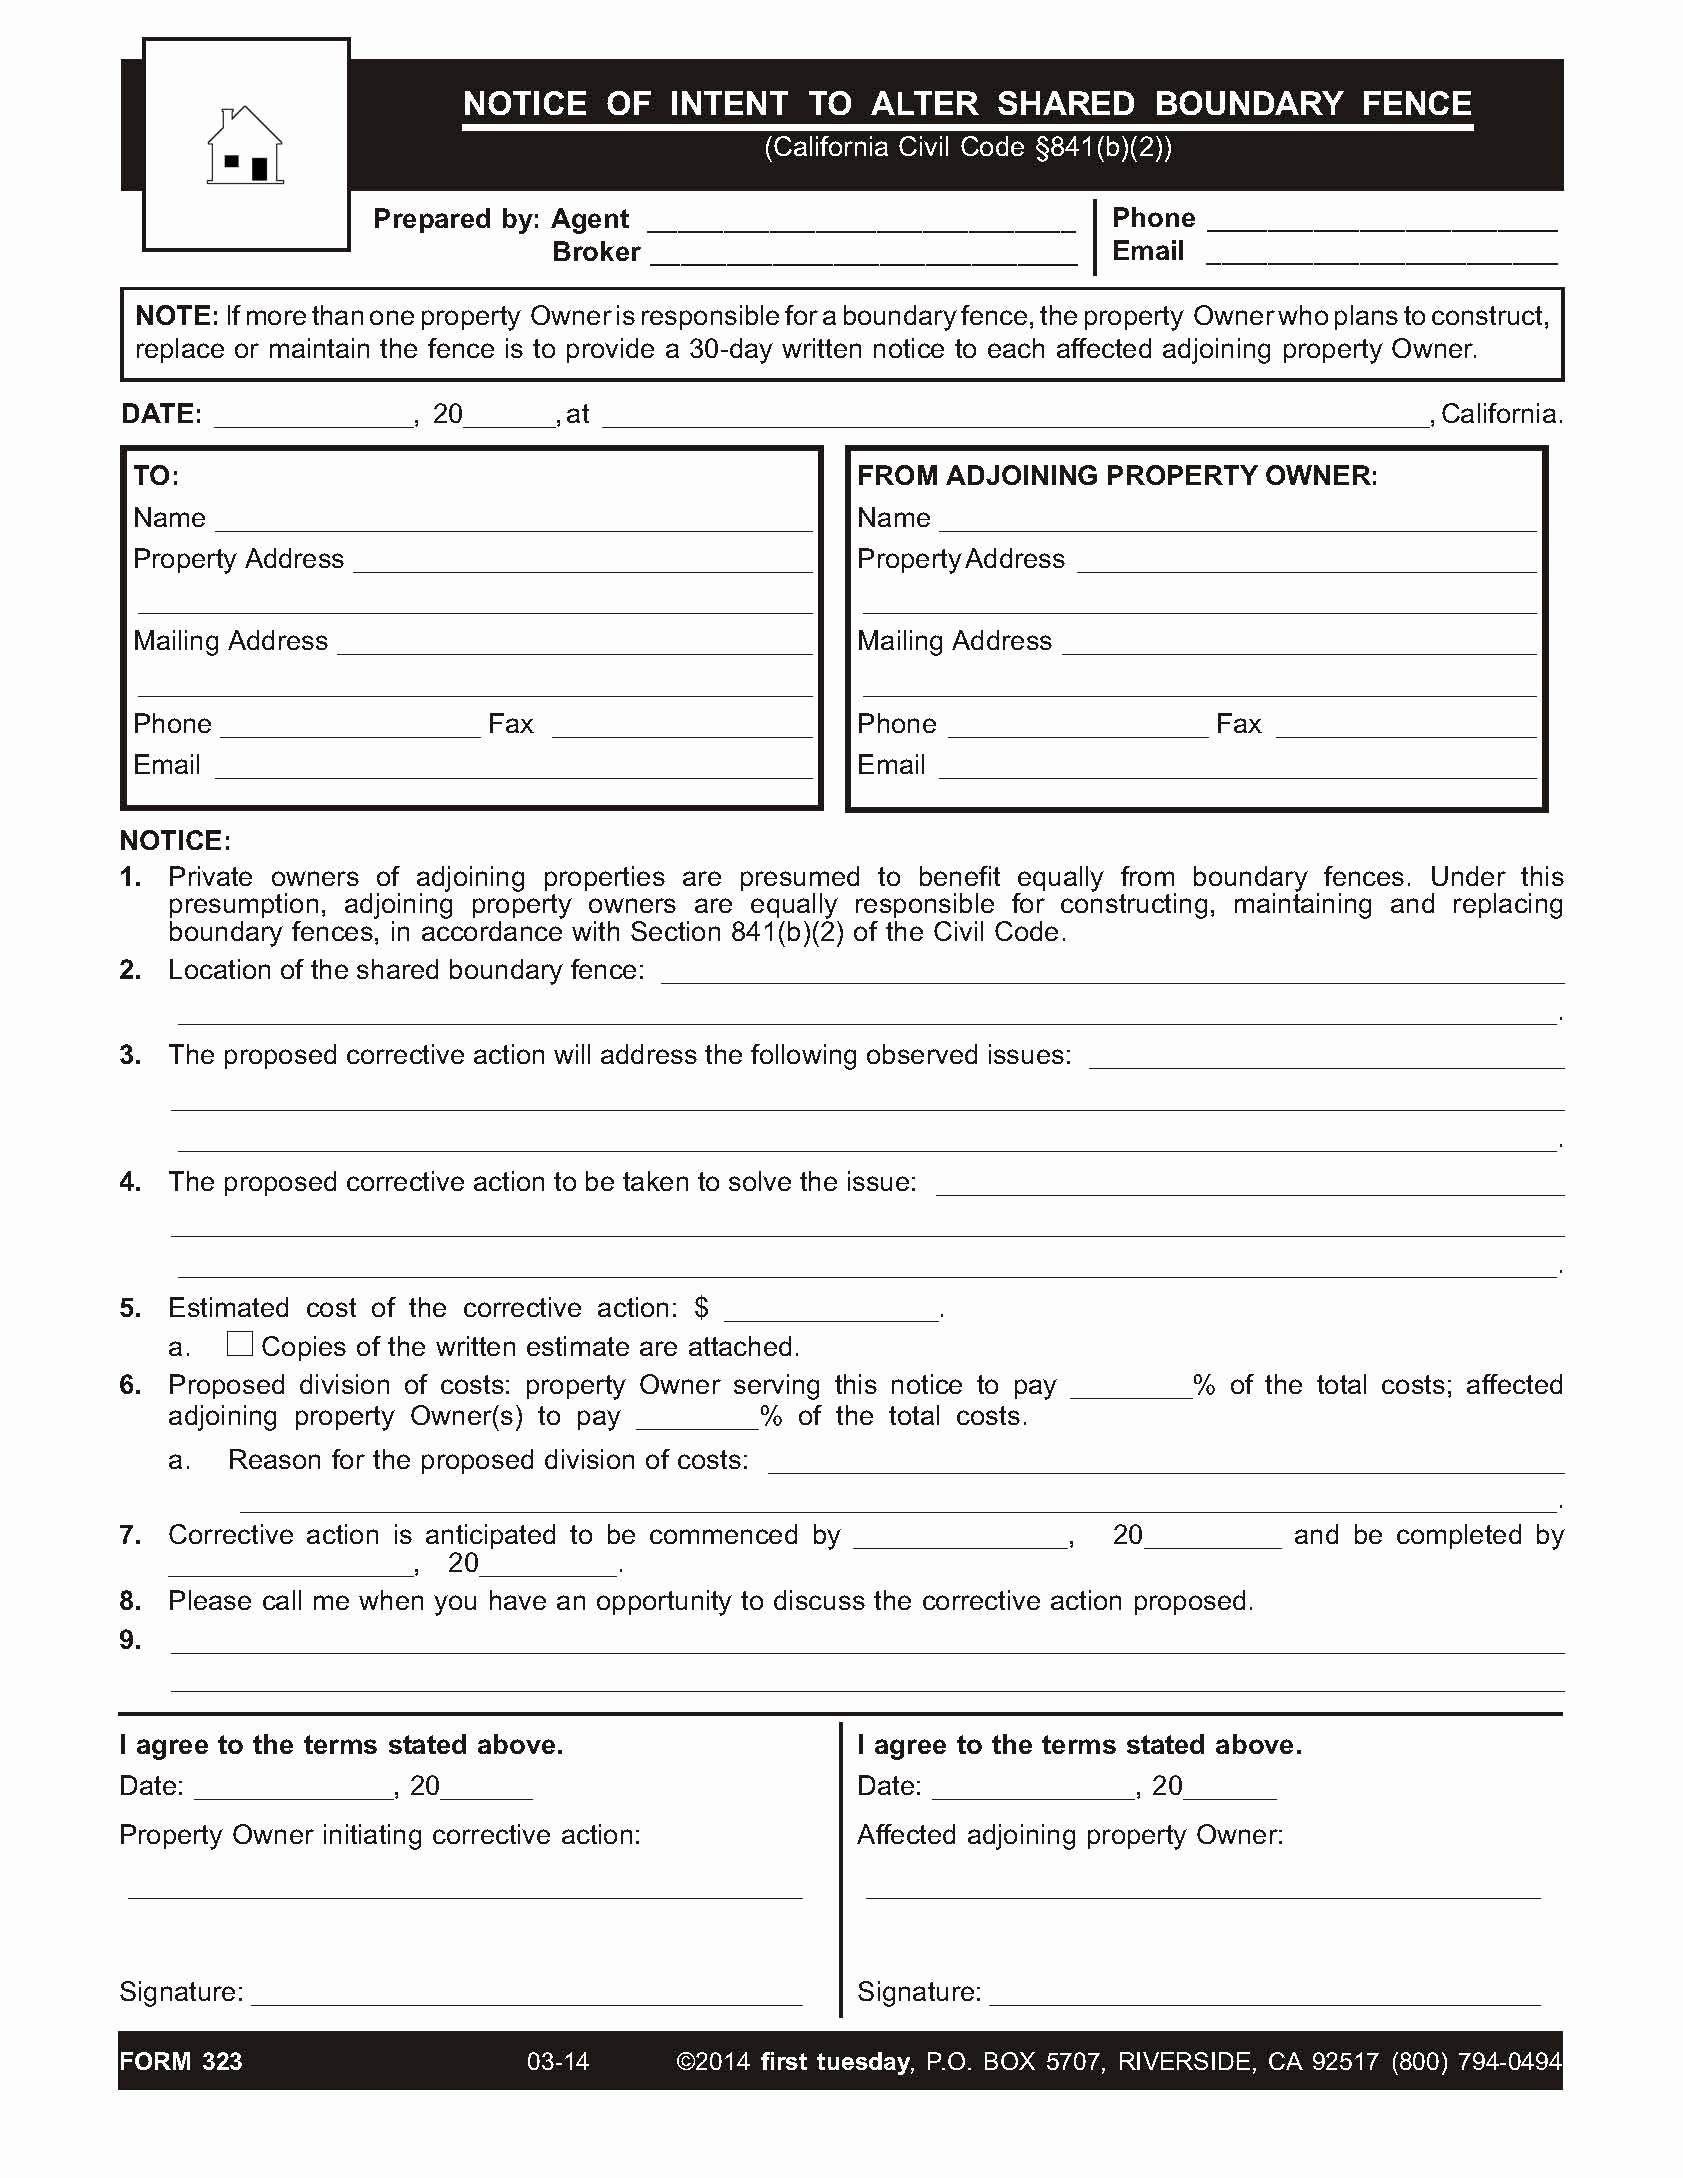 Fence Agreement Template Fresh Mon Boundary Fences An Owner S 30 Document